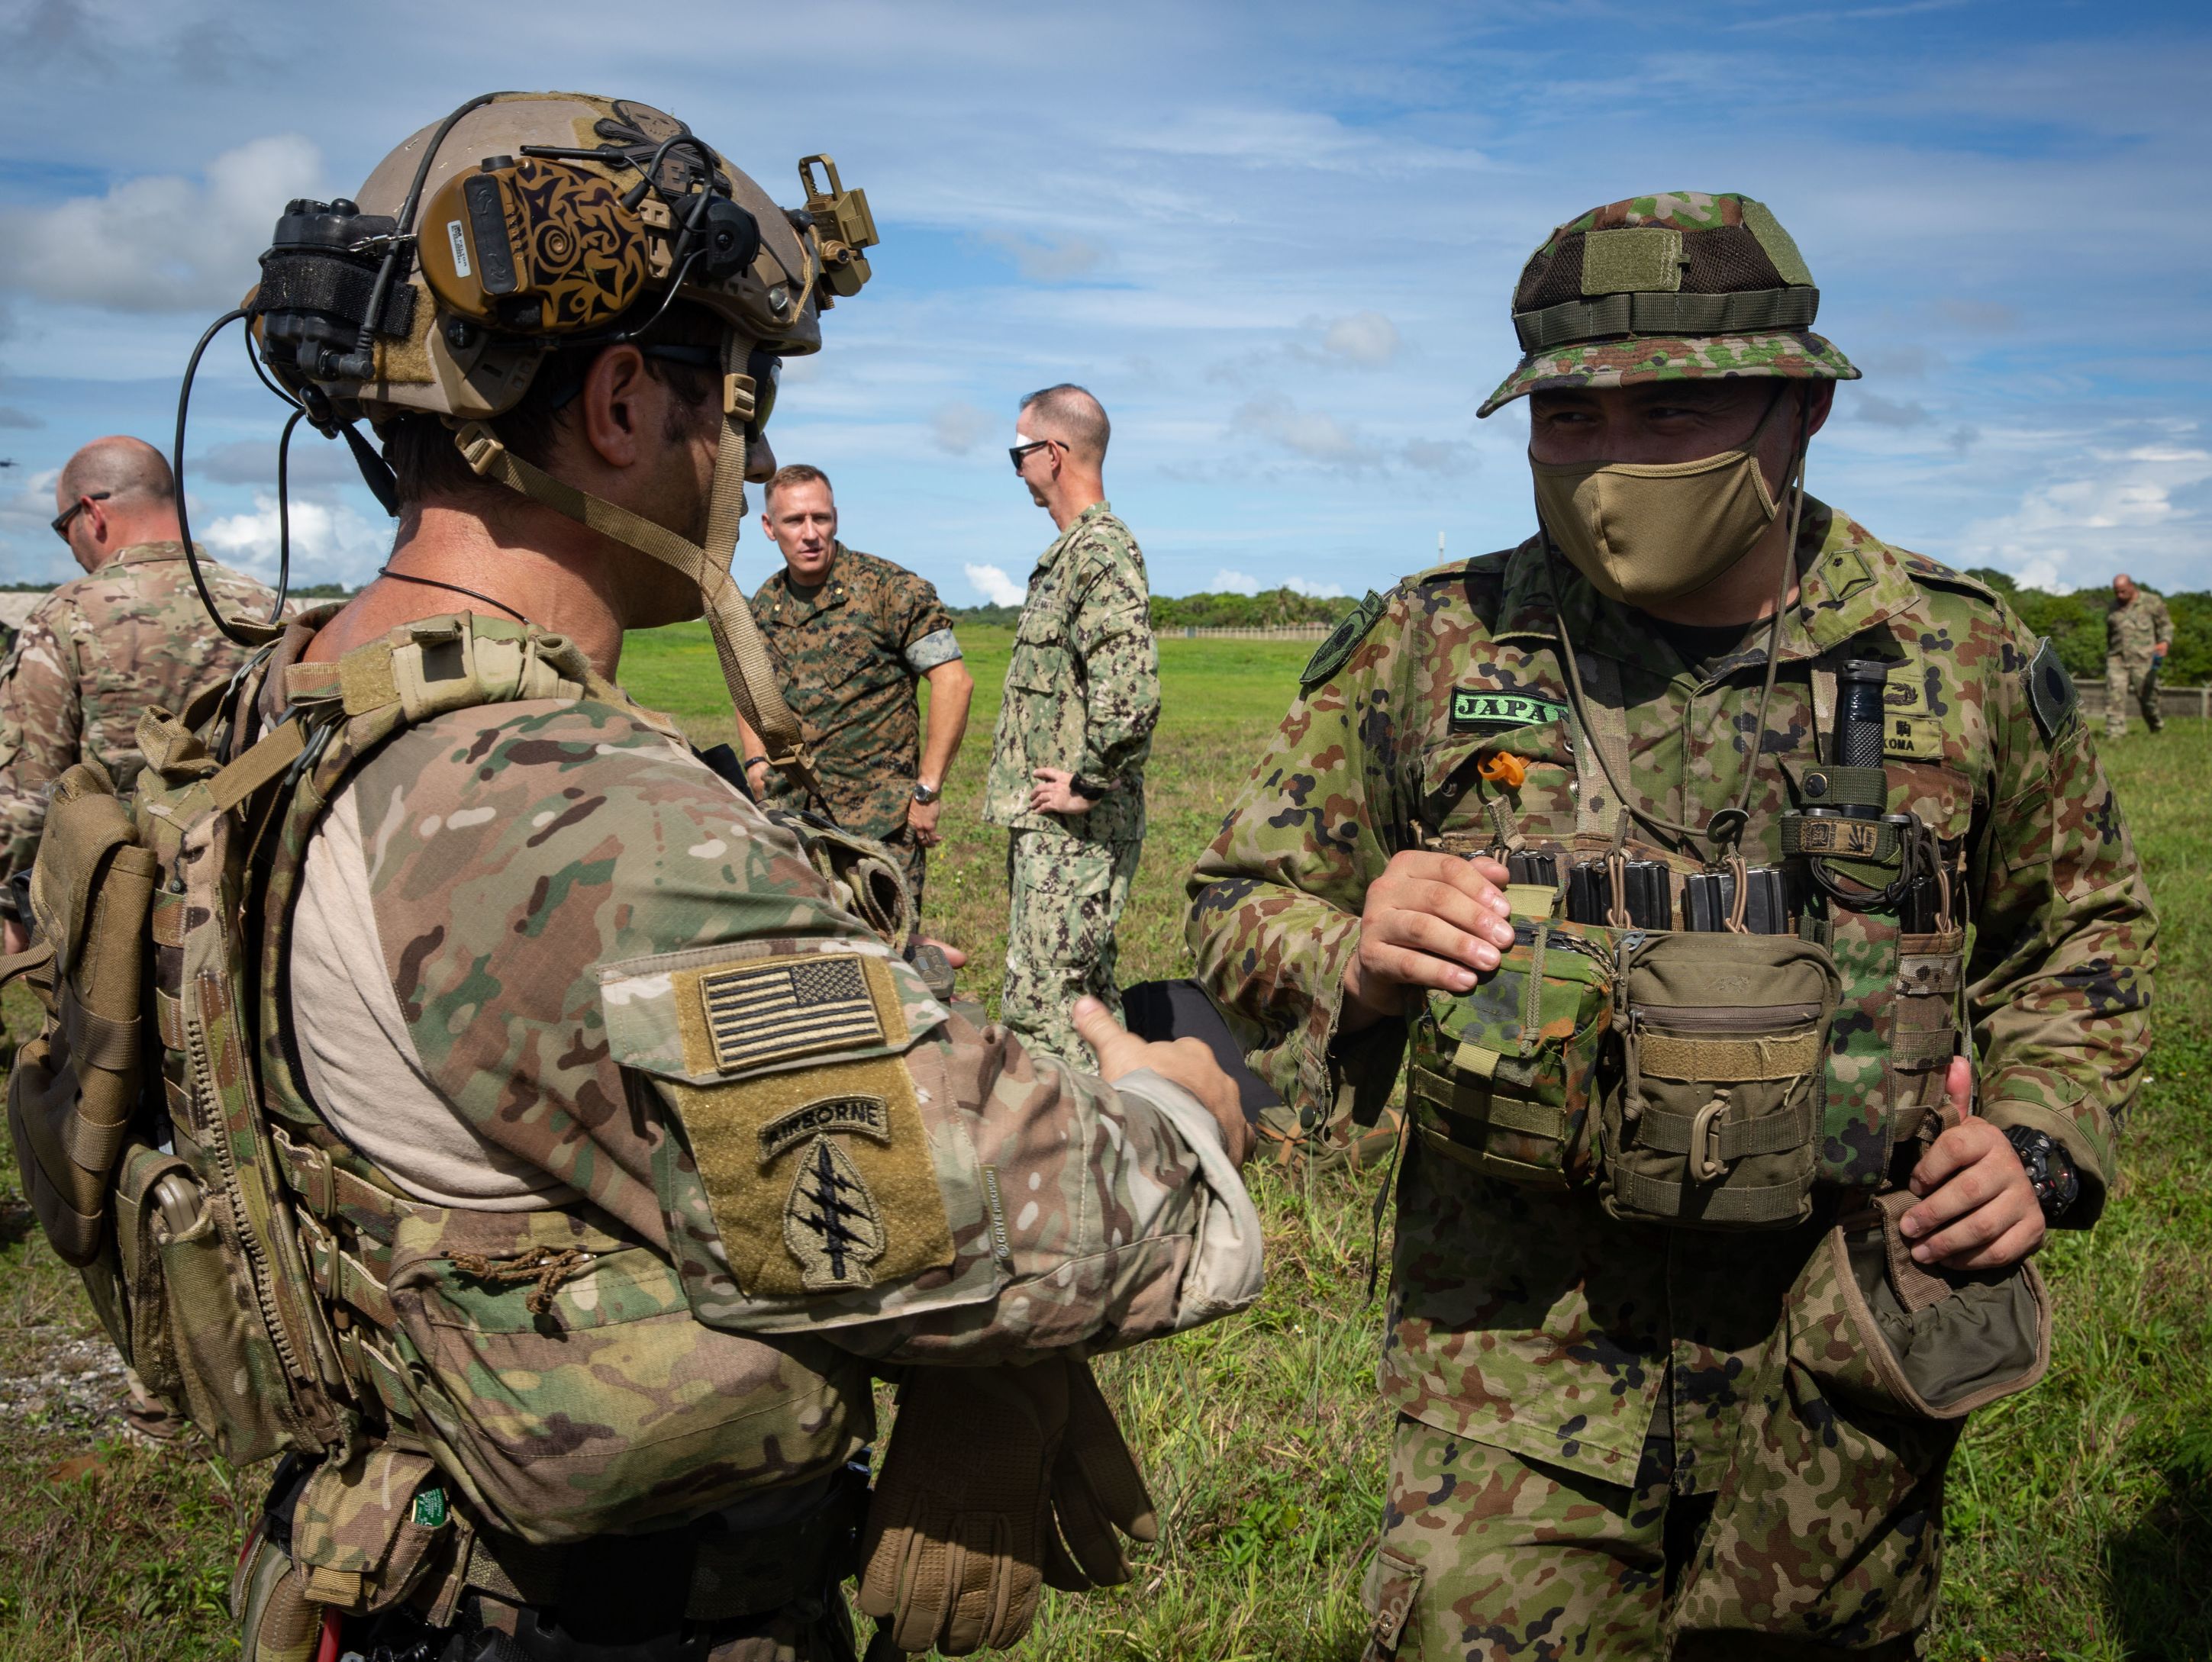 ANDERSEN AIR FORCE BASE, Guam – A U.S. Army Green Beret with 1st Battalion, 1st Special Forces Group (Airborne), discusses mission planning with a member of the Japan Ground Self-Defense Force